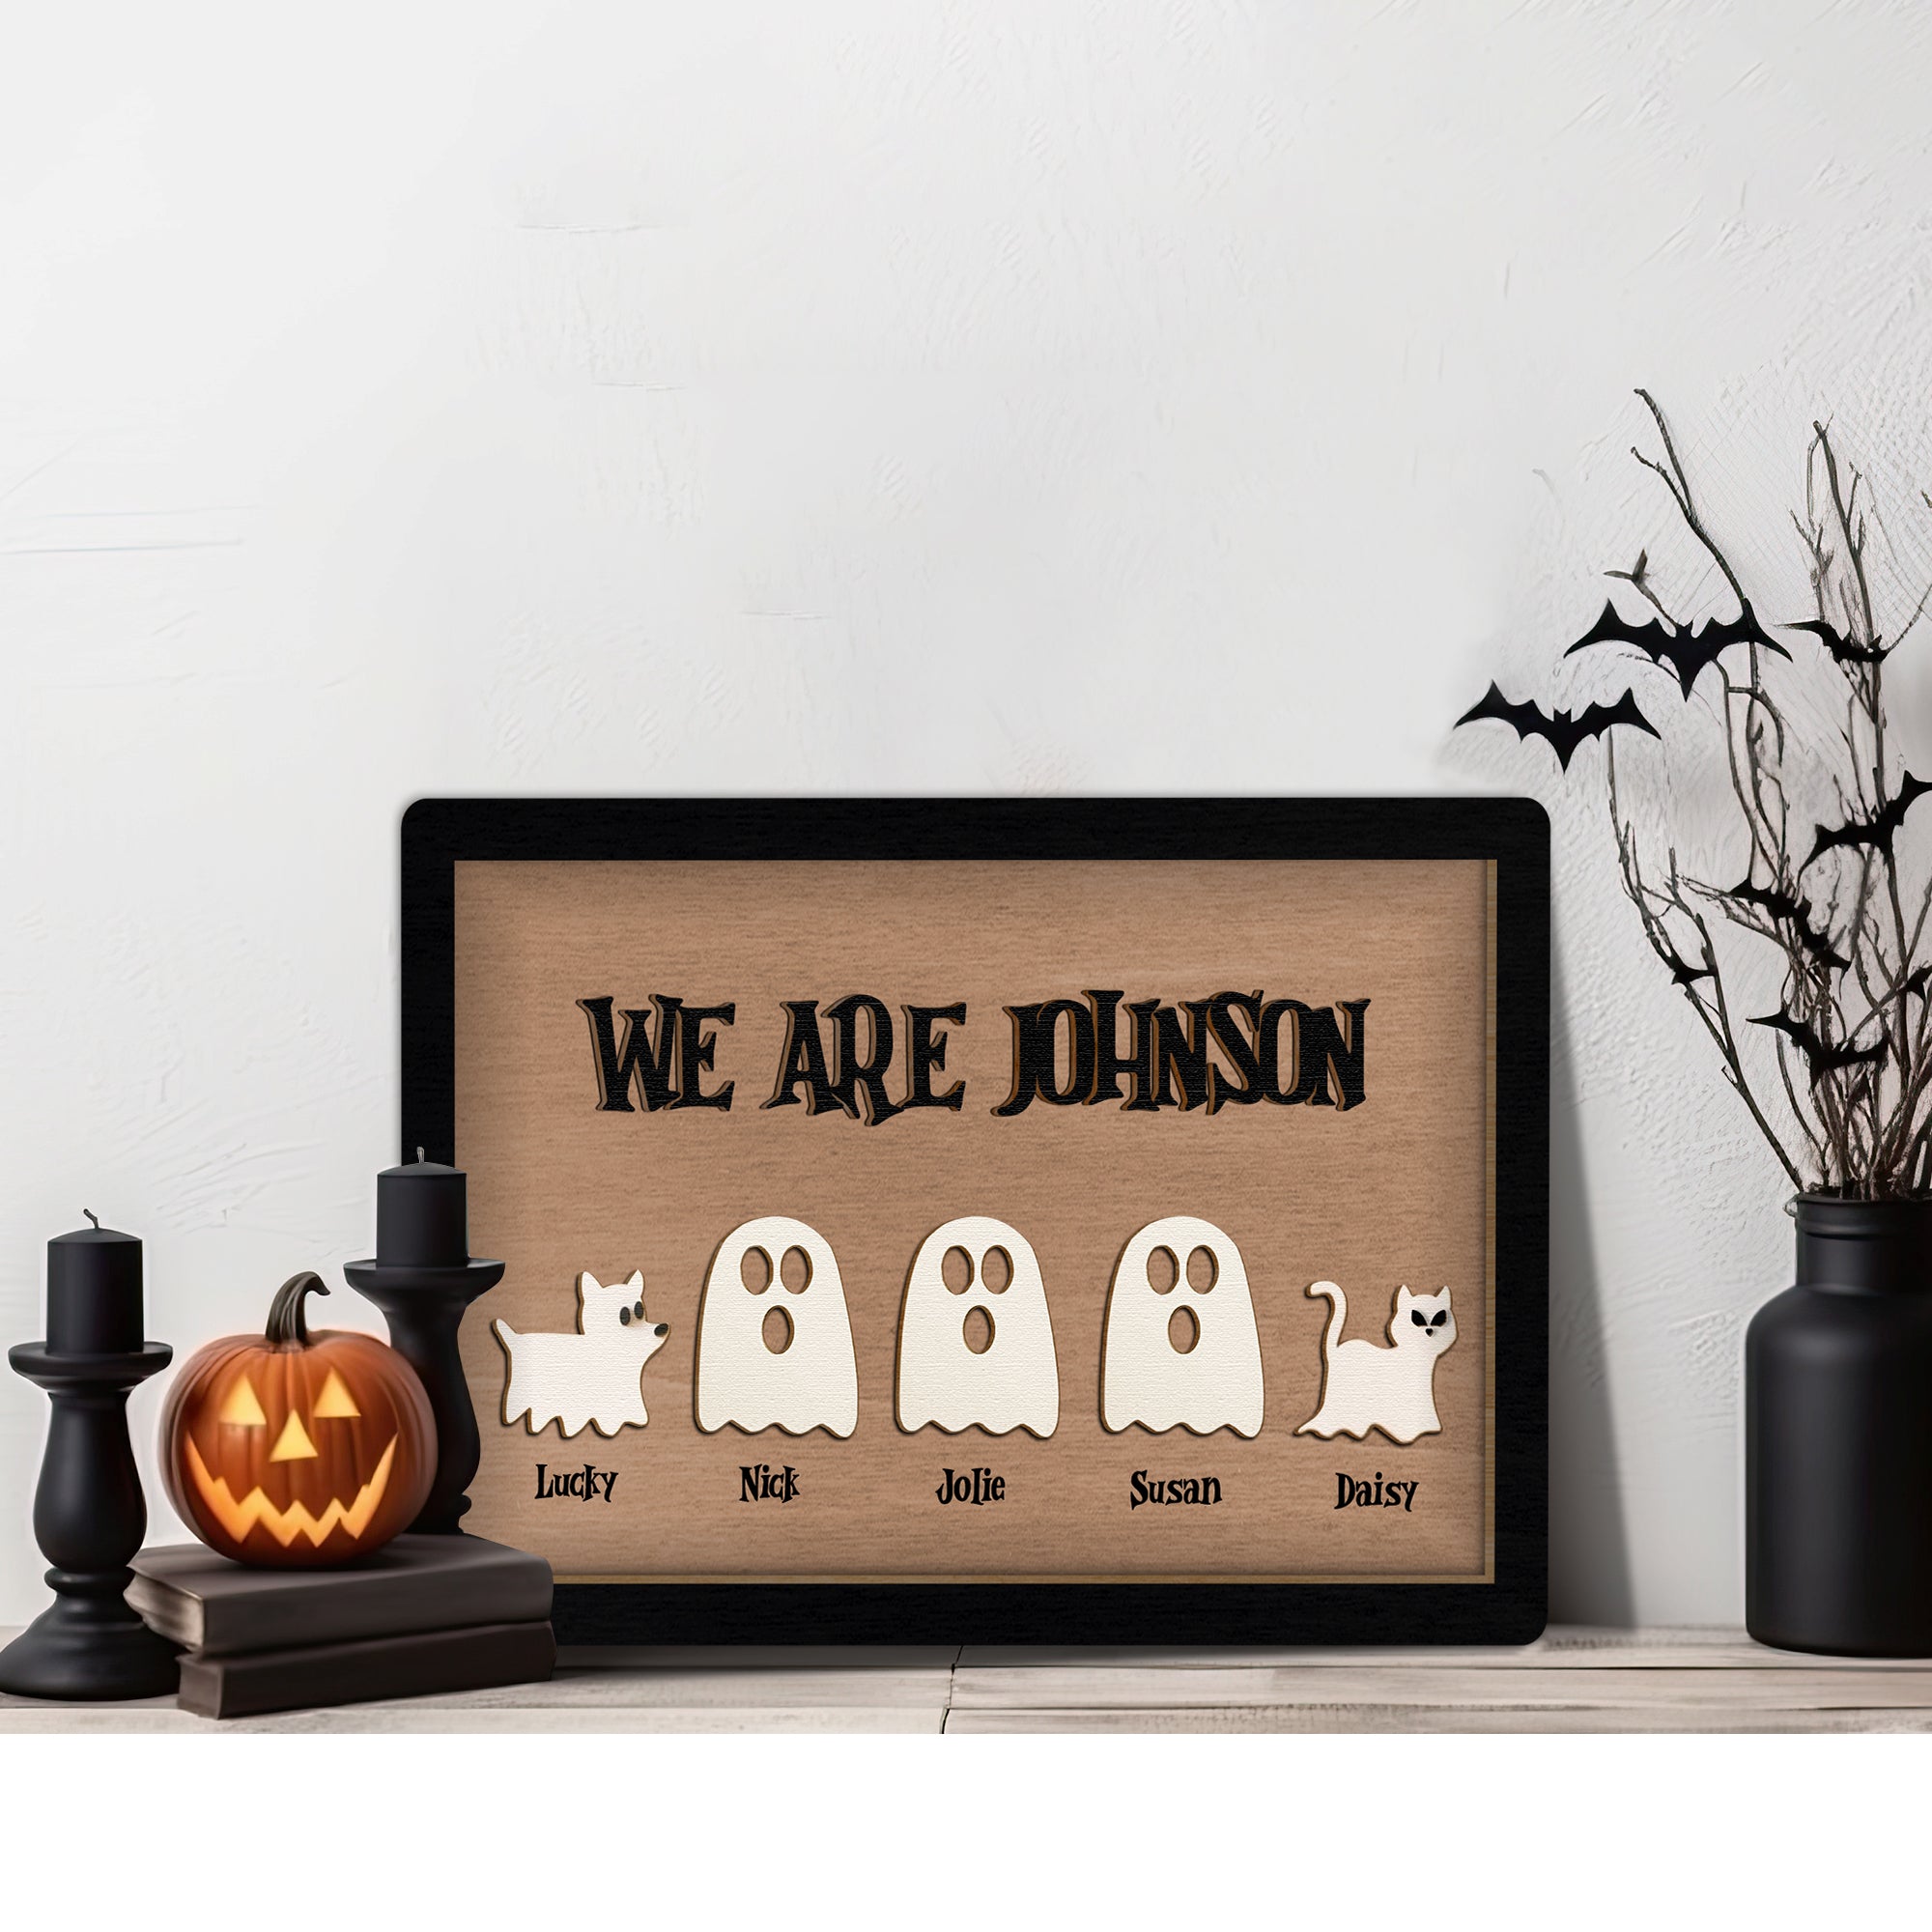 Personalized Halloween Sign, Ghost Family Sign, Ghost Decoration, Halloween Gift,  Spooky Cute Decor, Shelf Sitter Mantel | KindlyToys